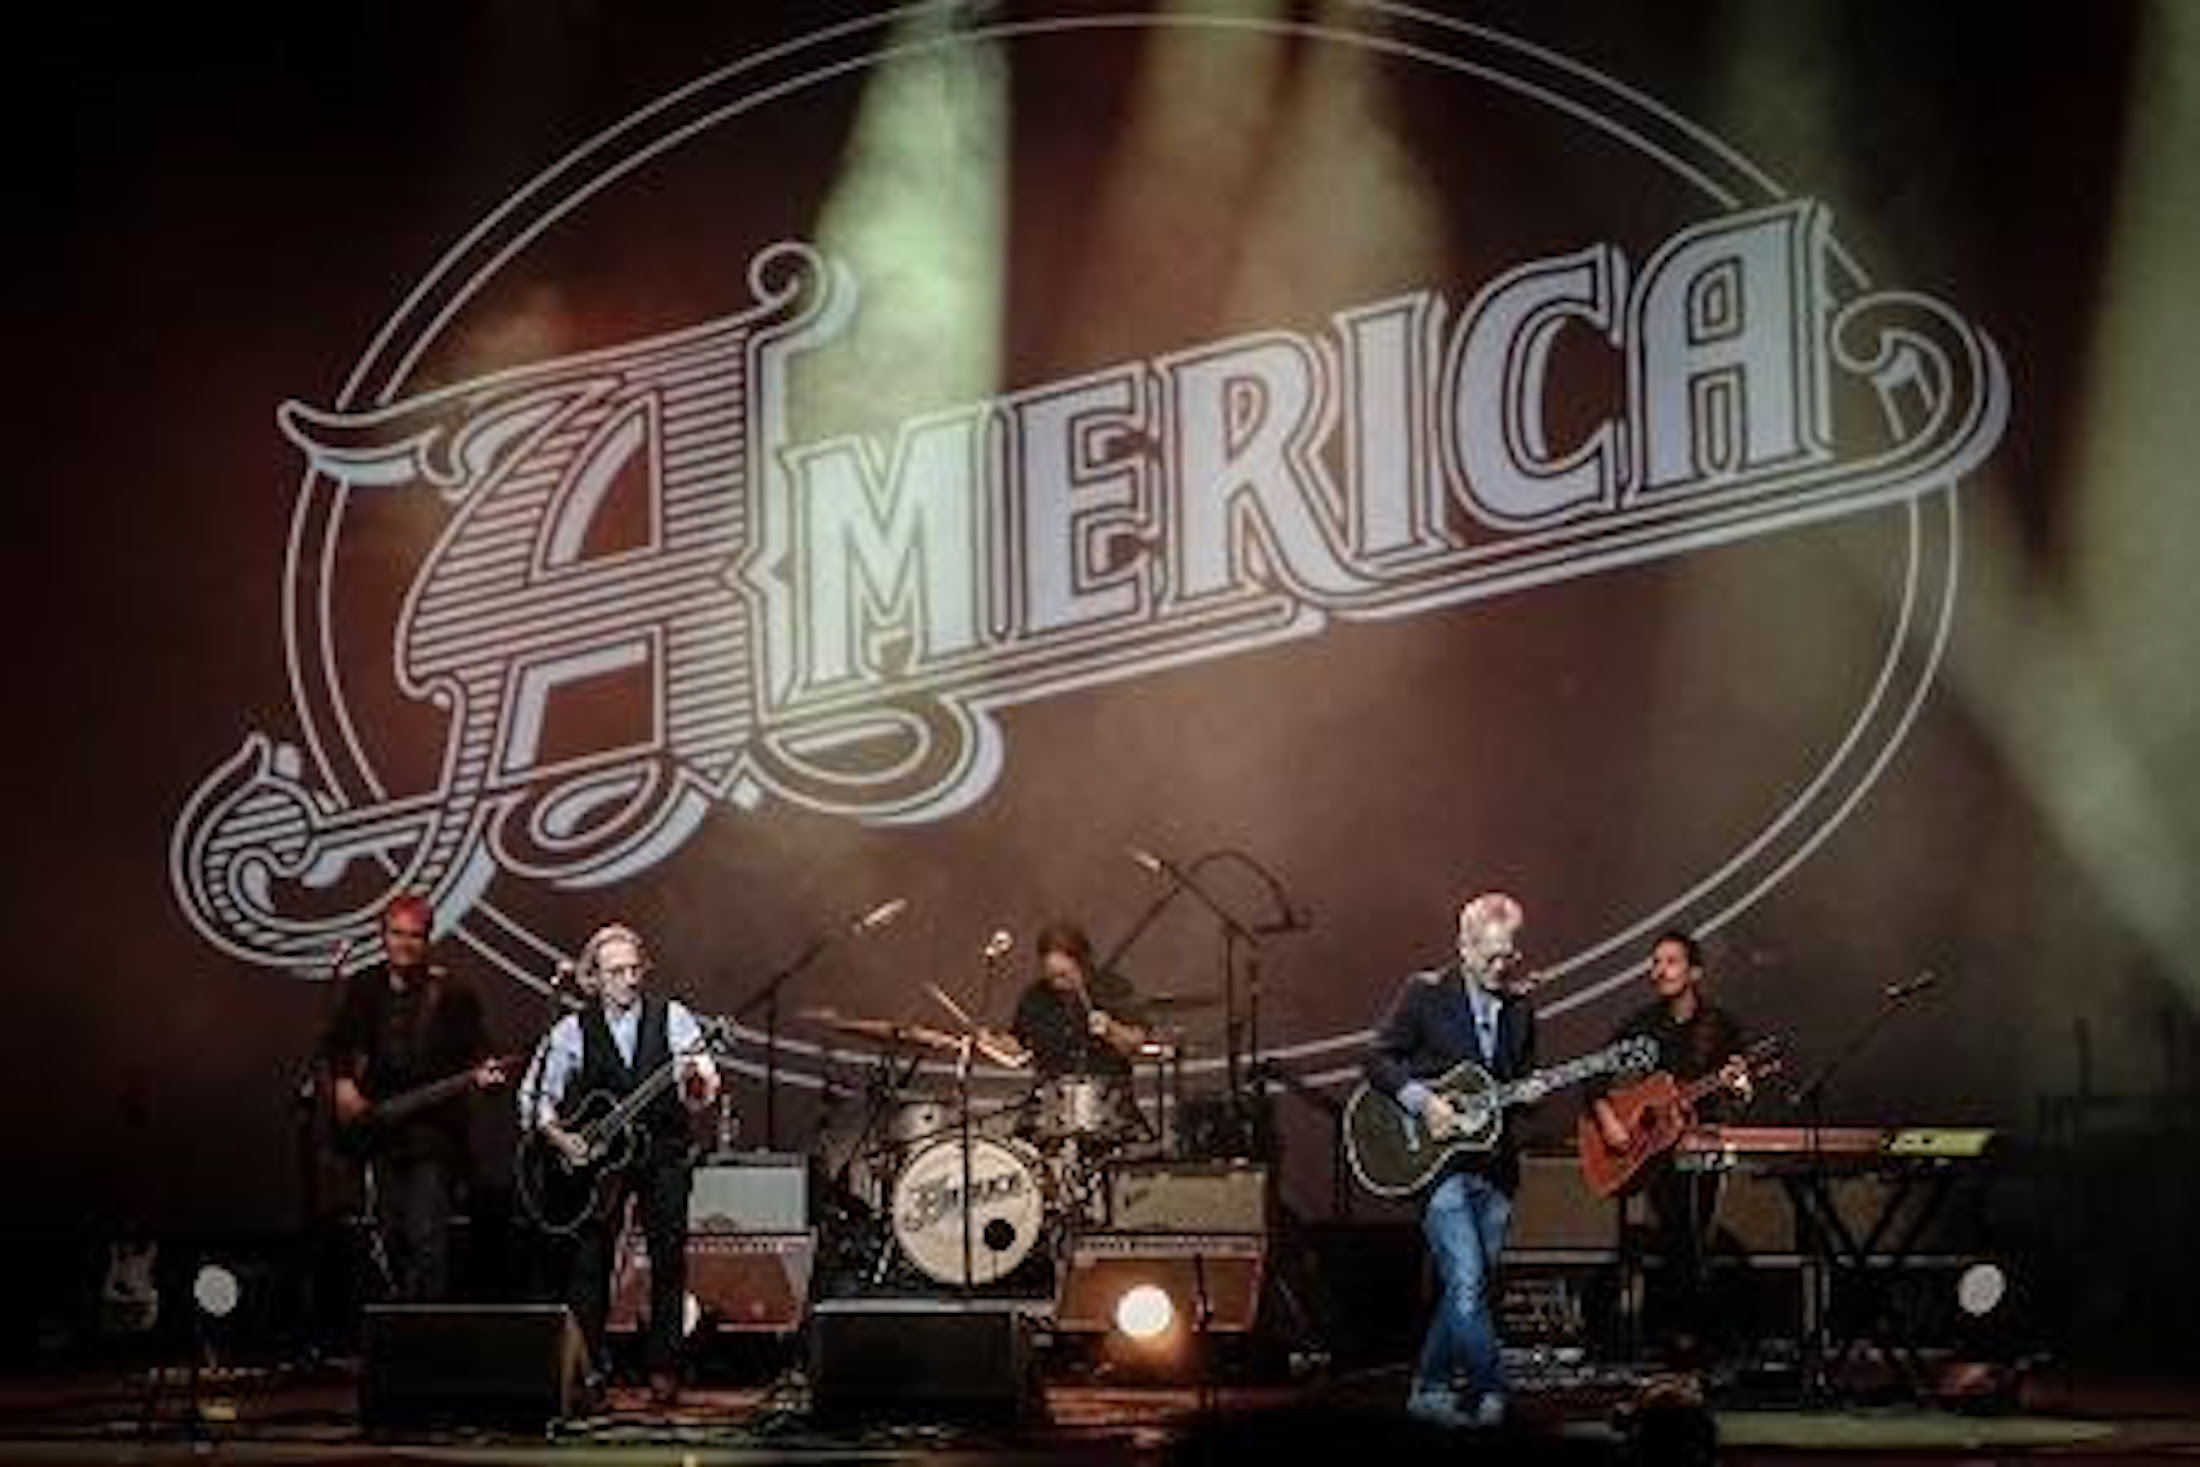 AMERICA SET TO PERFORM AT TOWN HALL IN NEW YORK CITY FRIDAY, DECEMBER 10th